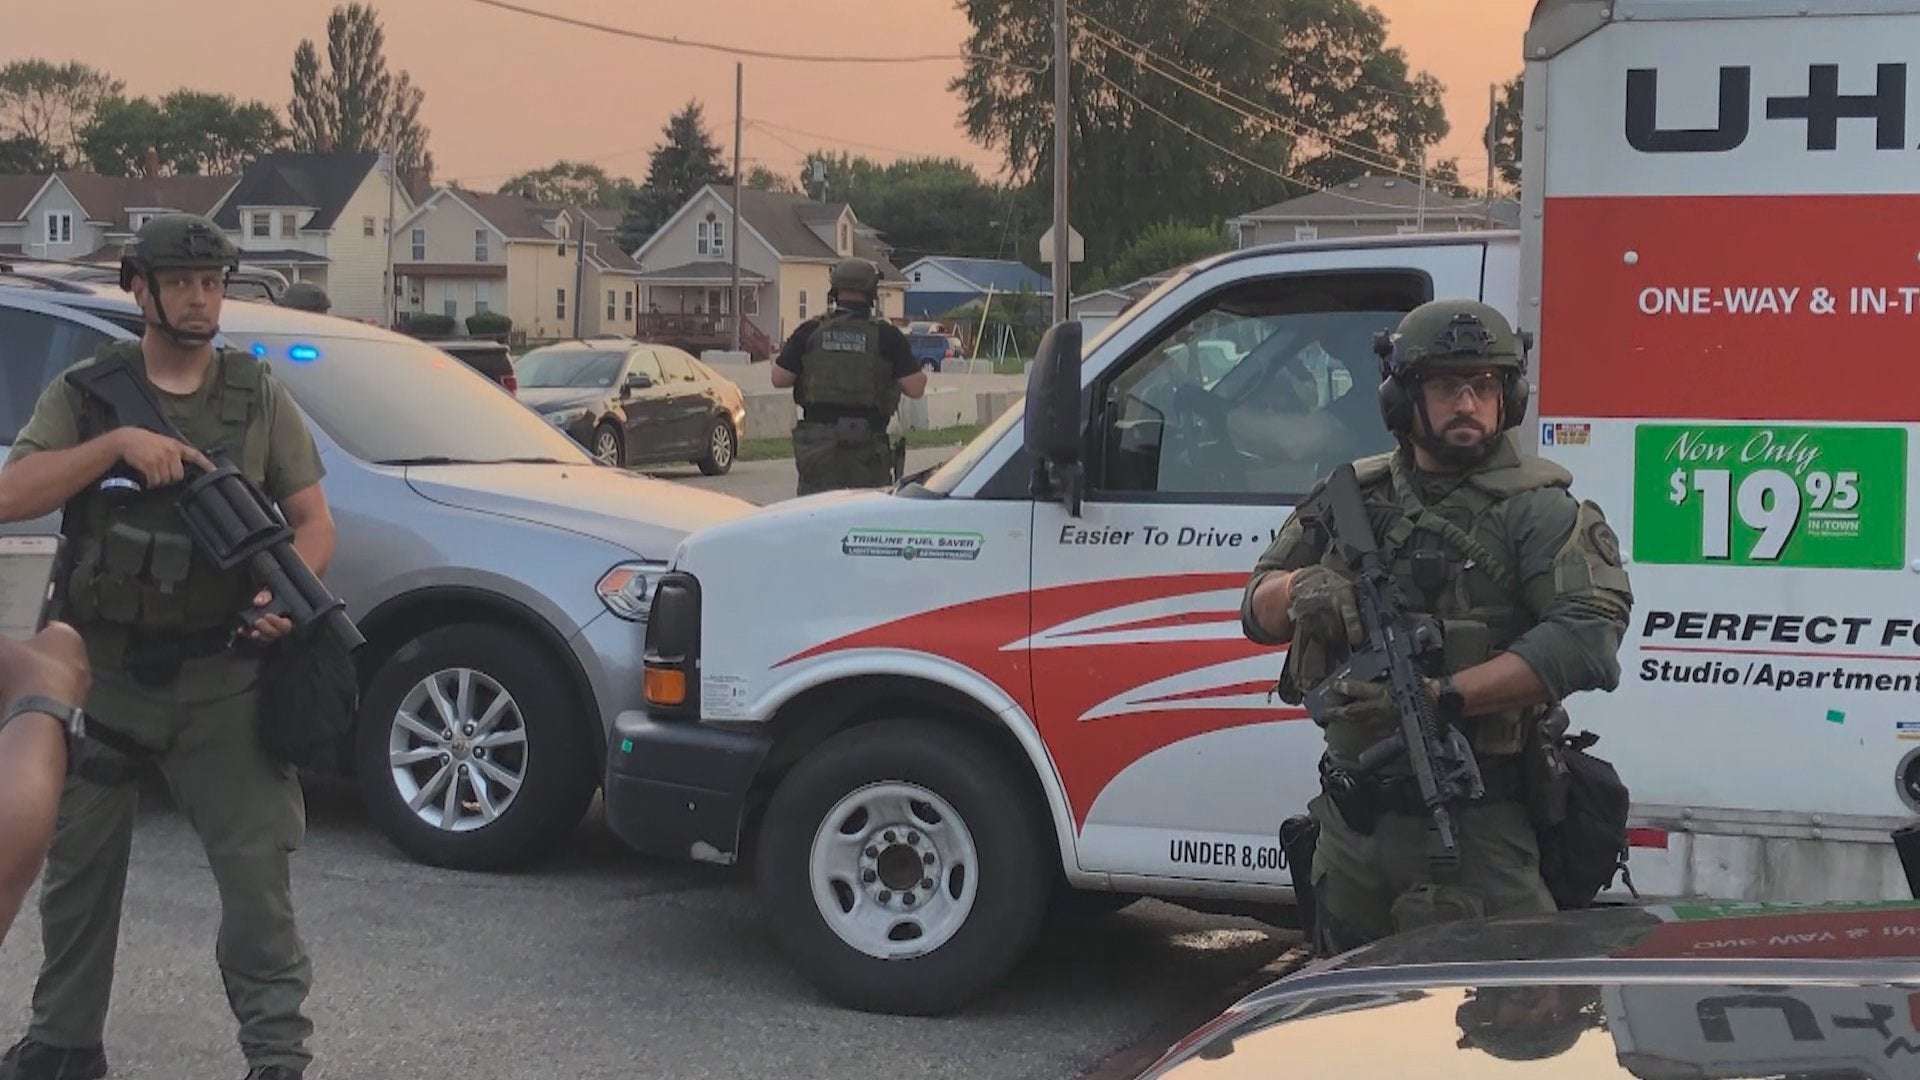 image for Church truck with supplies for protesters seized in Kenosha